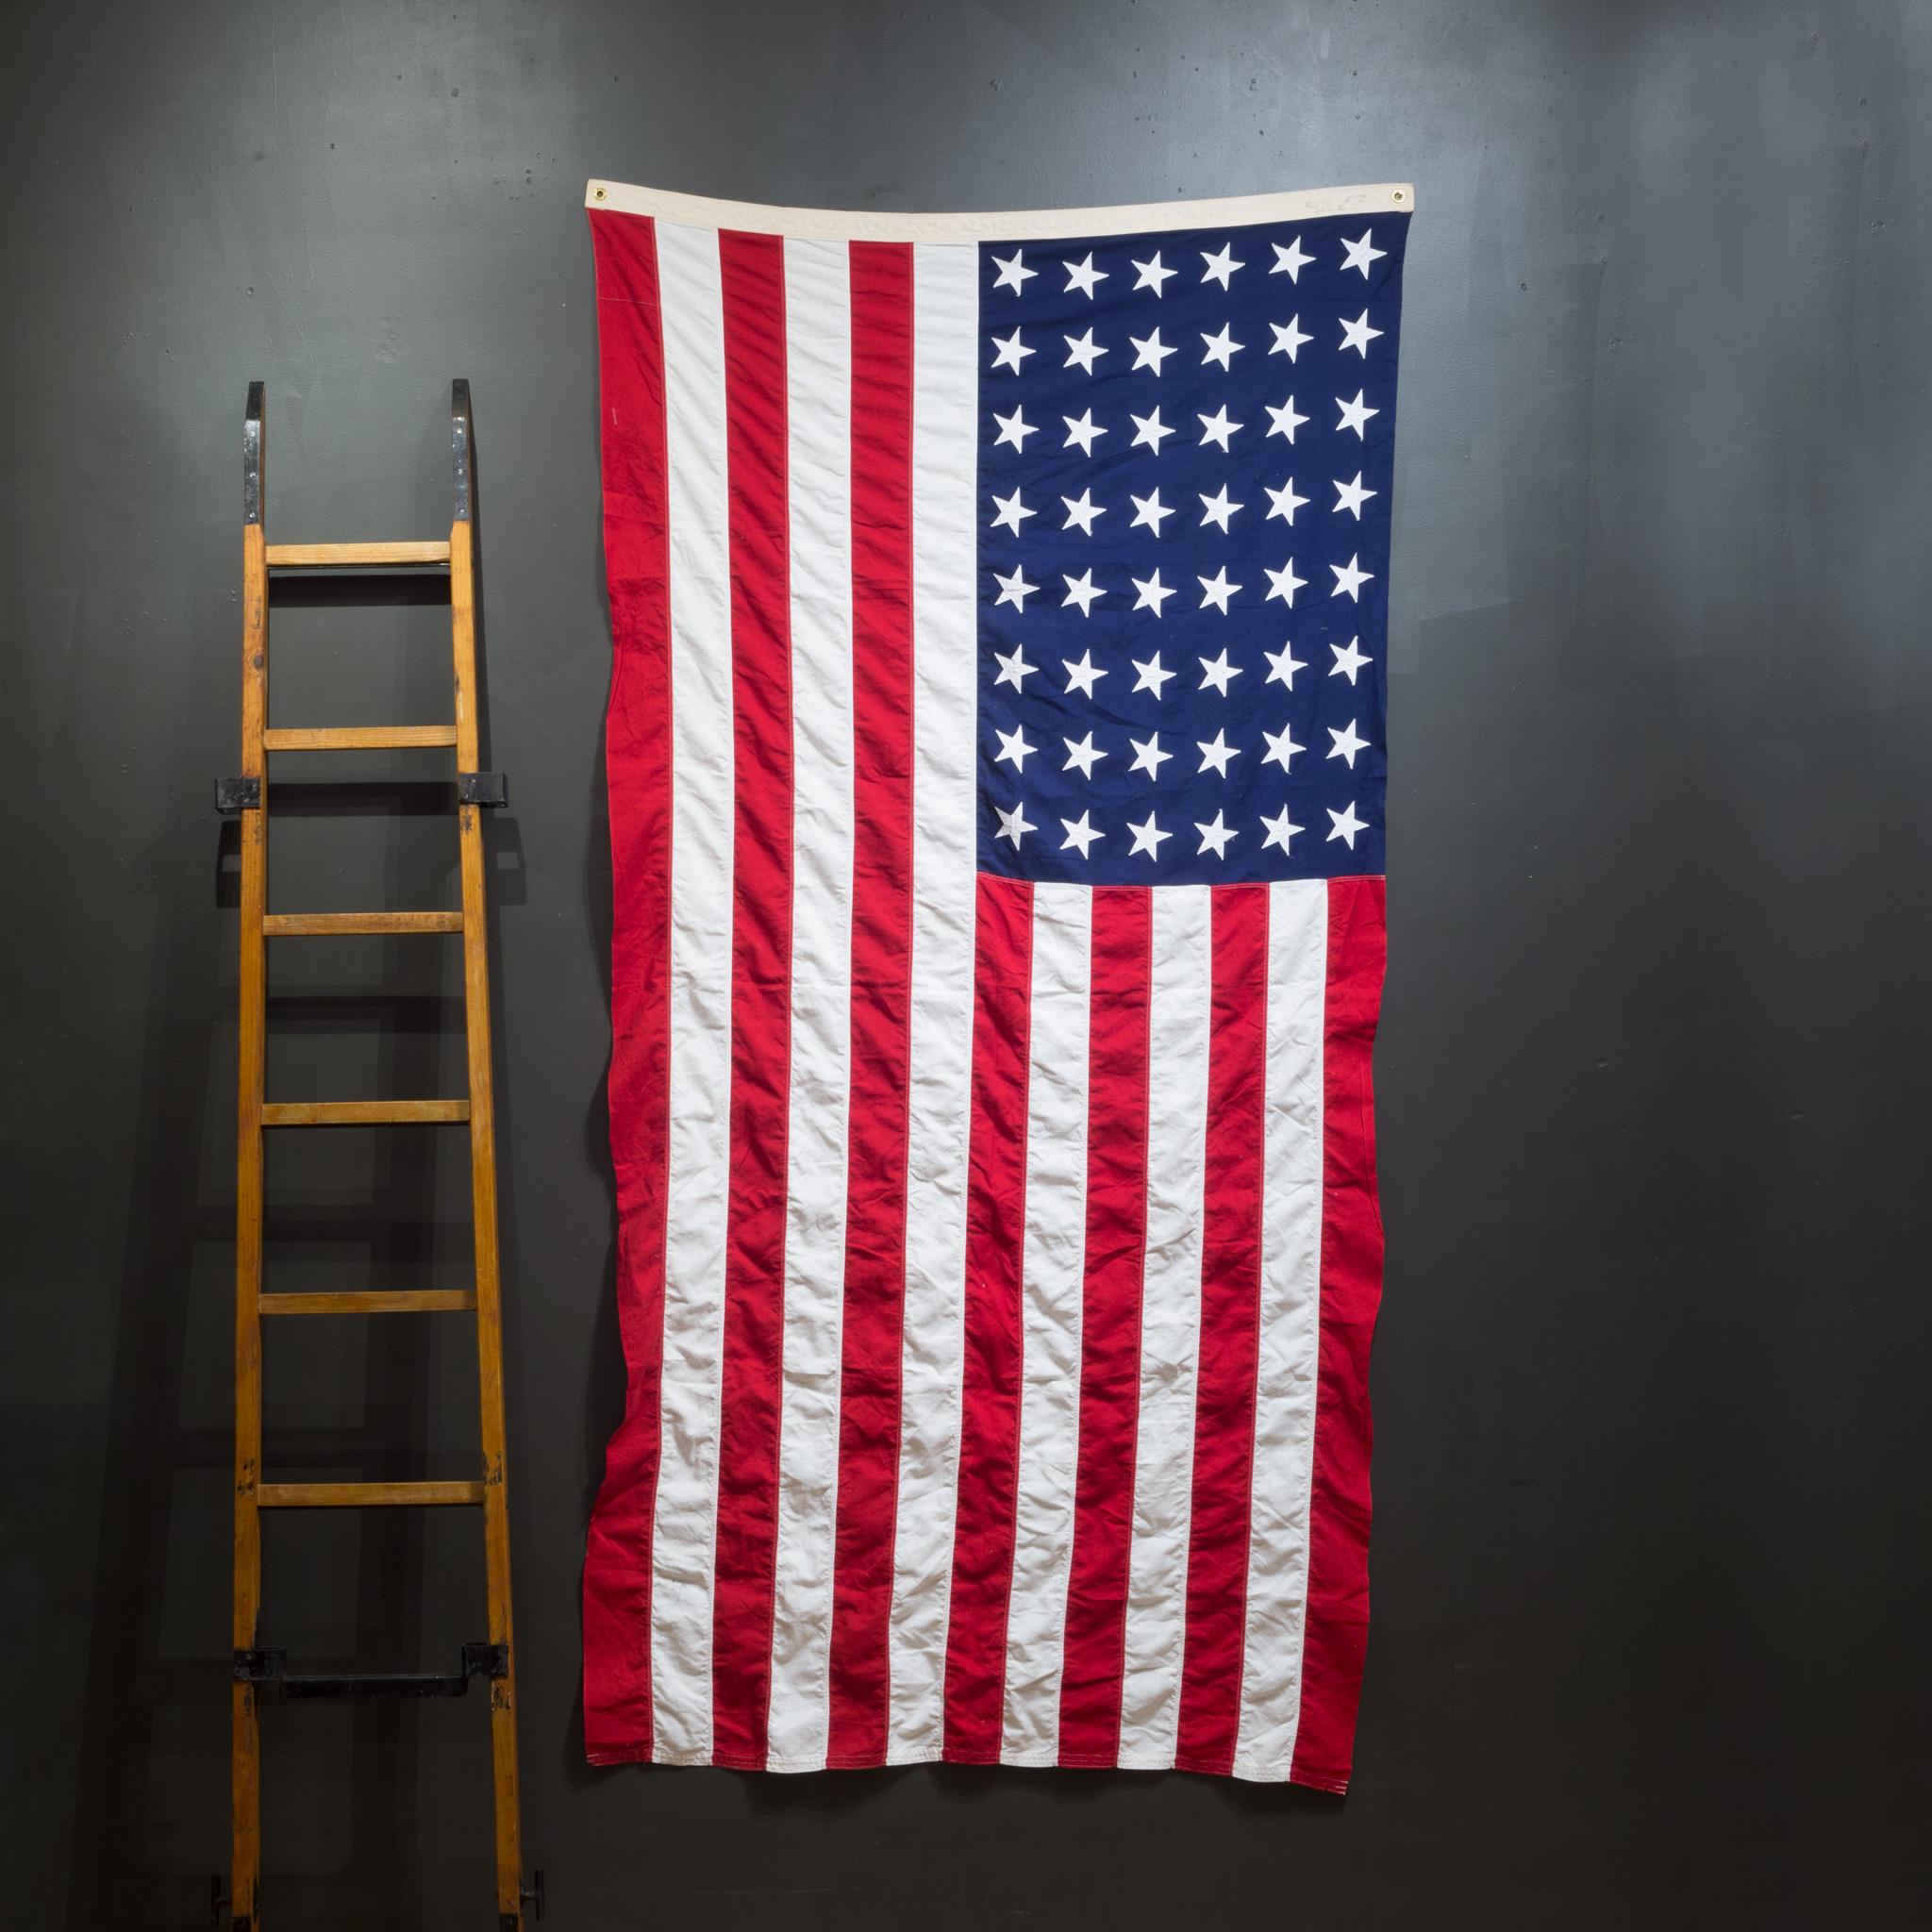 ABOUT

This is an original monumental American flag made by Valley Forge Co. with 48 hand sewn stars and stripes. It is in good condition and has metal grommets to hang.

 CREATOR Valley Forge Co.
 DATE OF MANUFACTURE c.1940-1950.
 MATERIALS